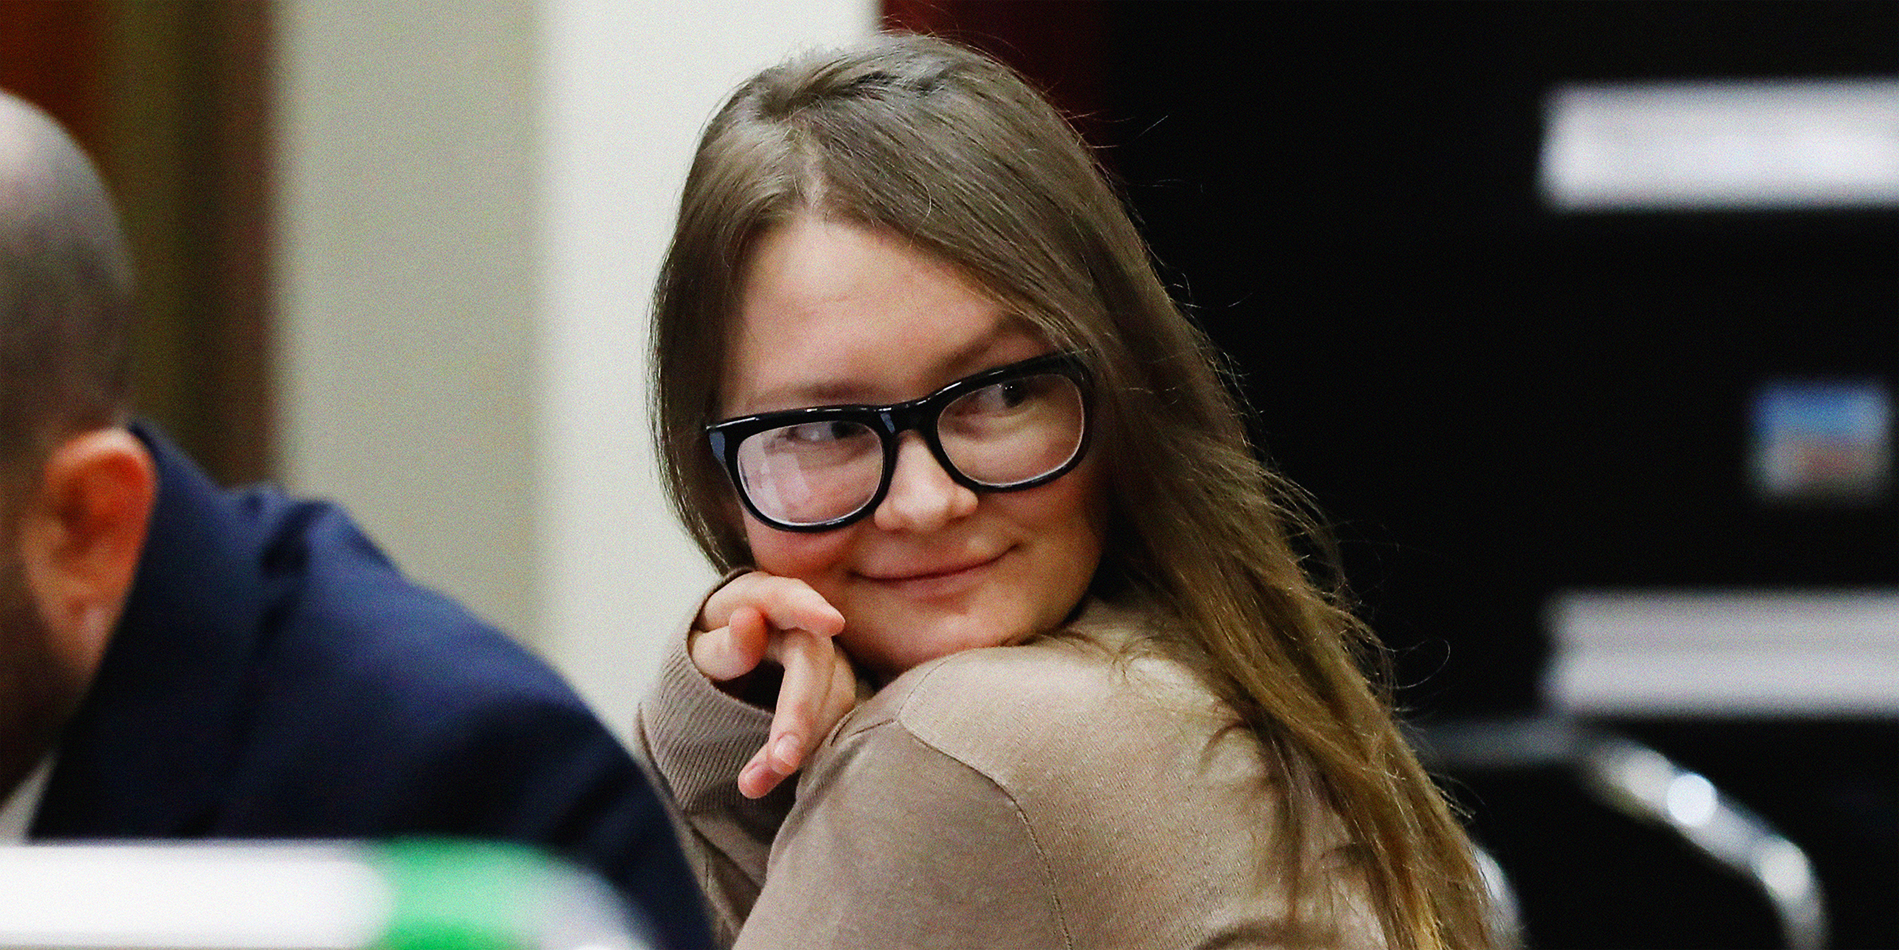 Where is Anna Delvey? Is She in Jail? 4